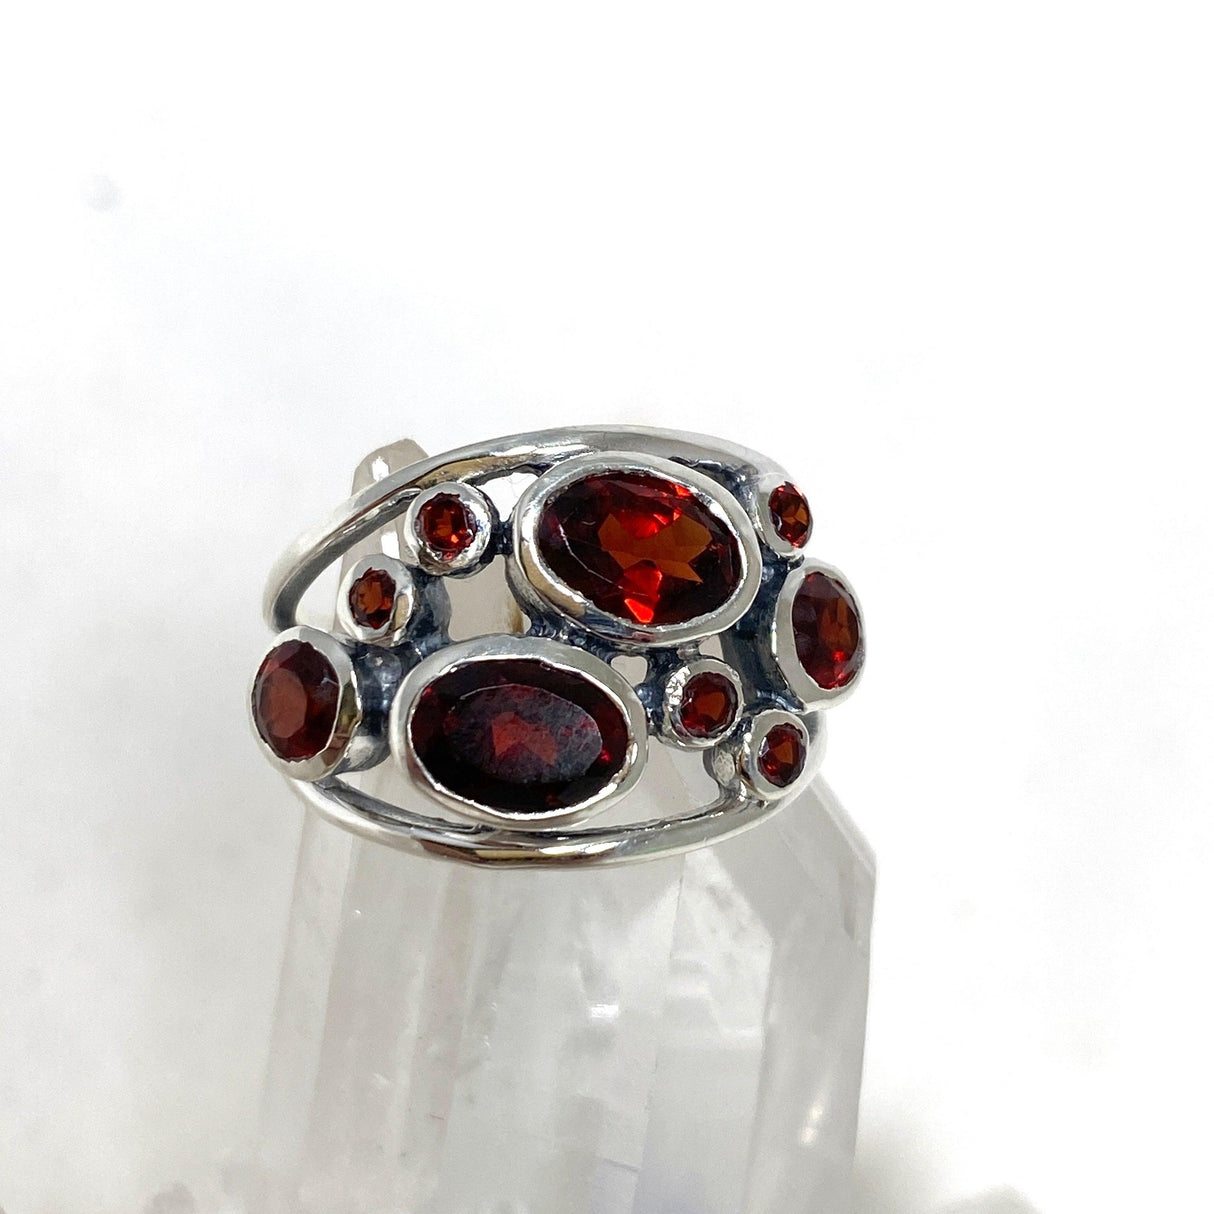 Garnet Faceted Multistone Gemstone Ring in a Decorative Setting R3787 - Nature's Magick